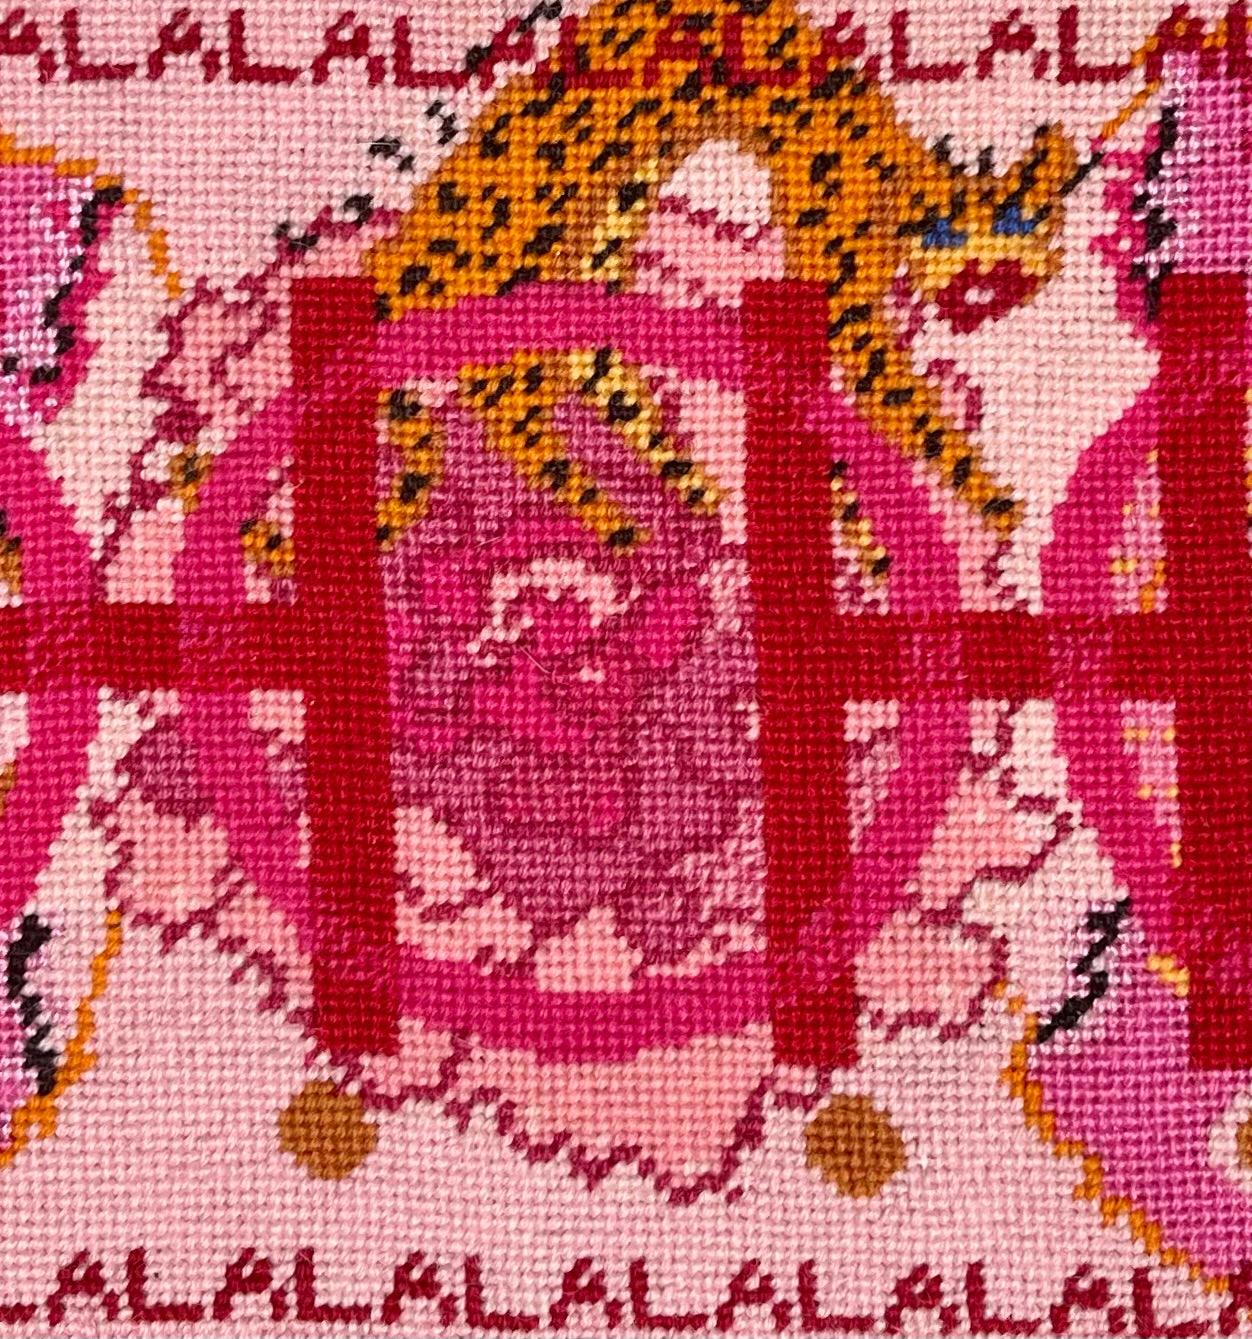 needlepoint pillow with pink and red colorful pattern, blue eye, cheetah, heart snakes, roses and lettering OOH in center with a LA LA LA border